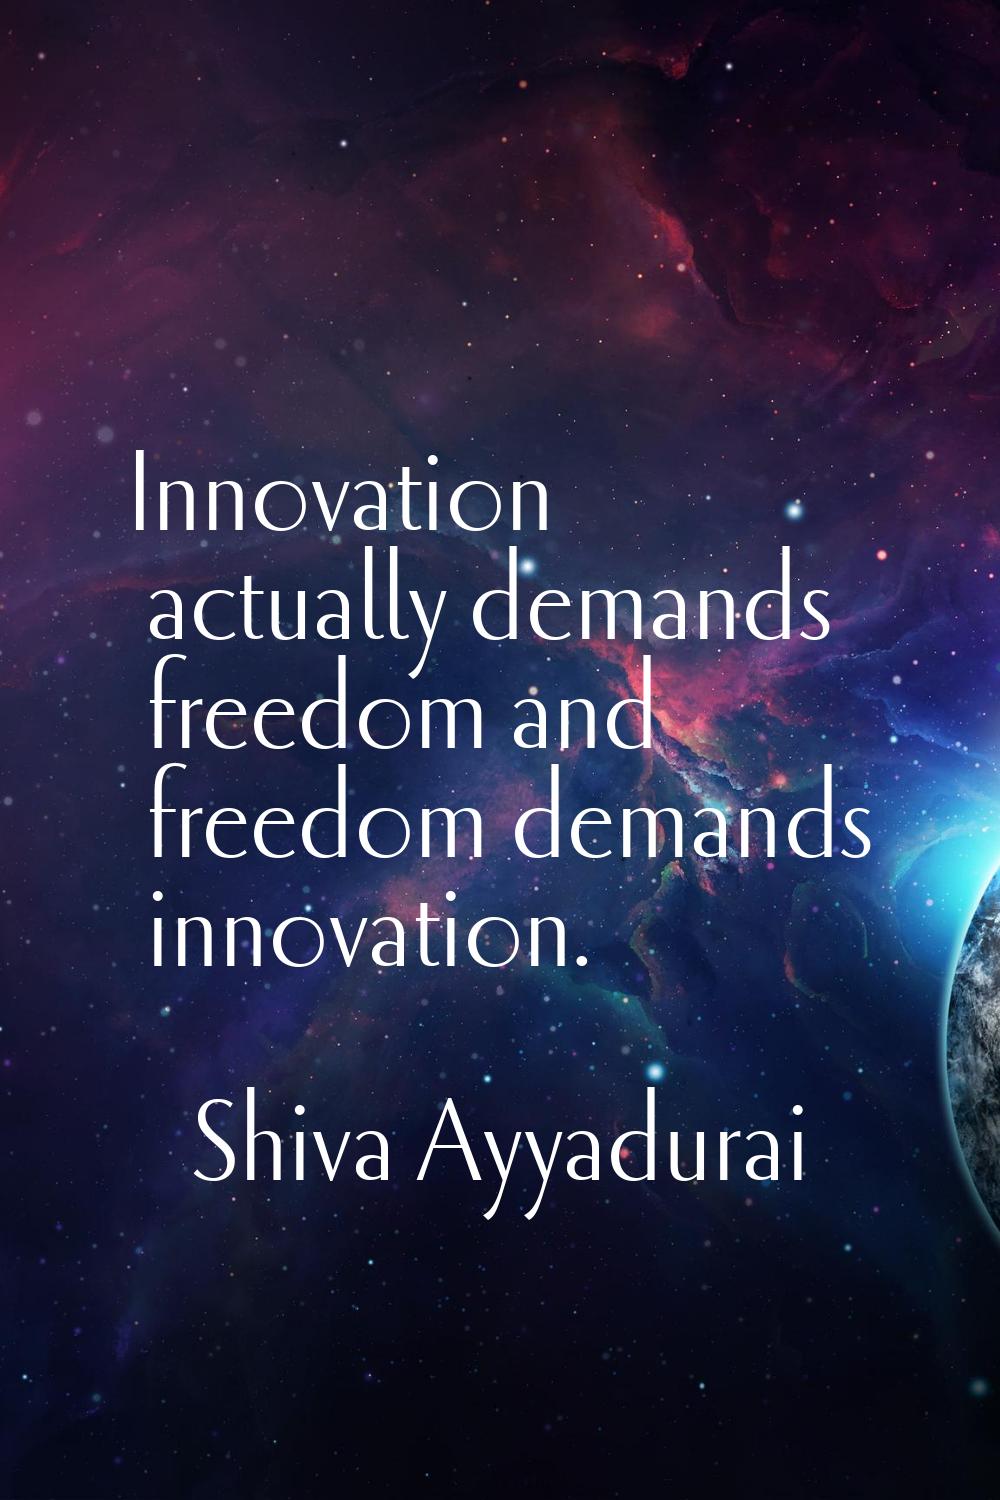 Innovation actually demands freedom and freedom demands innovation.